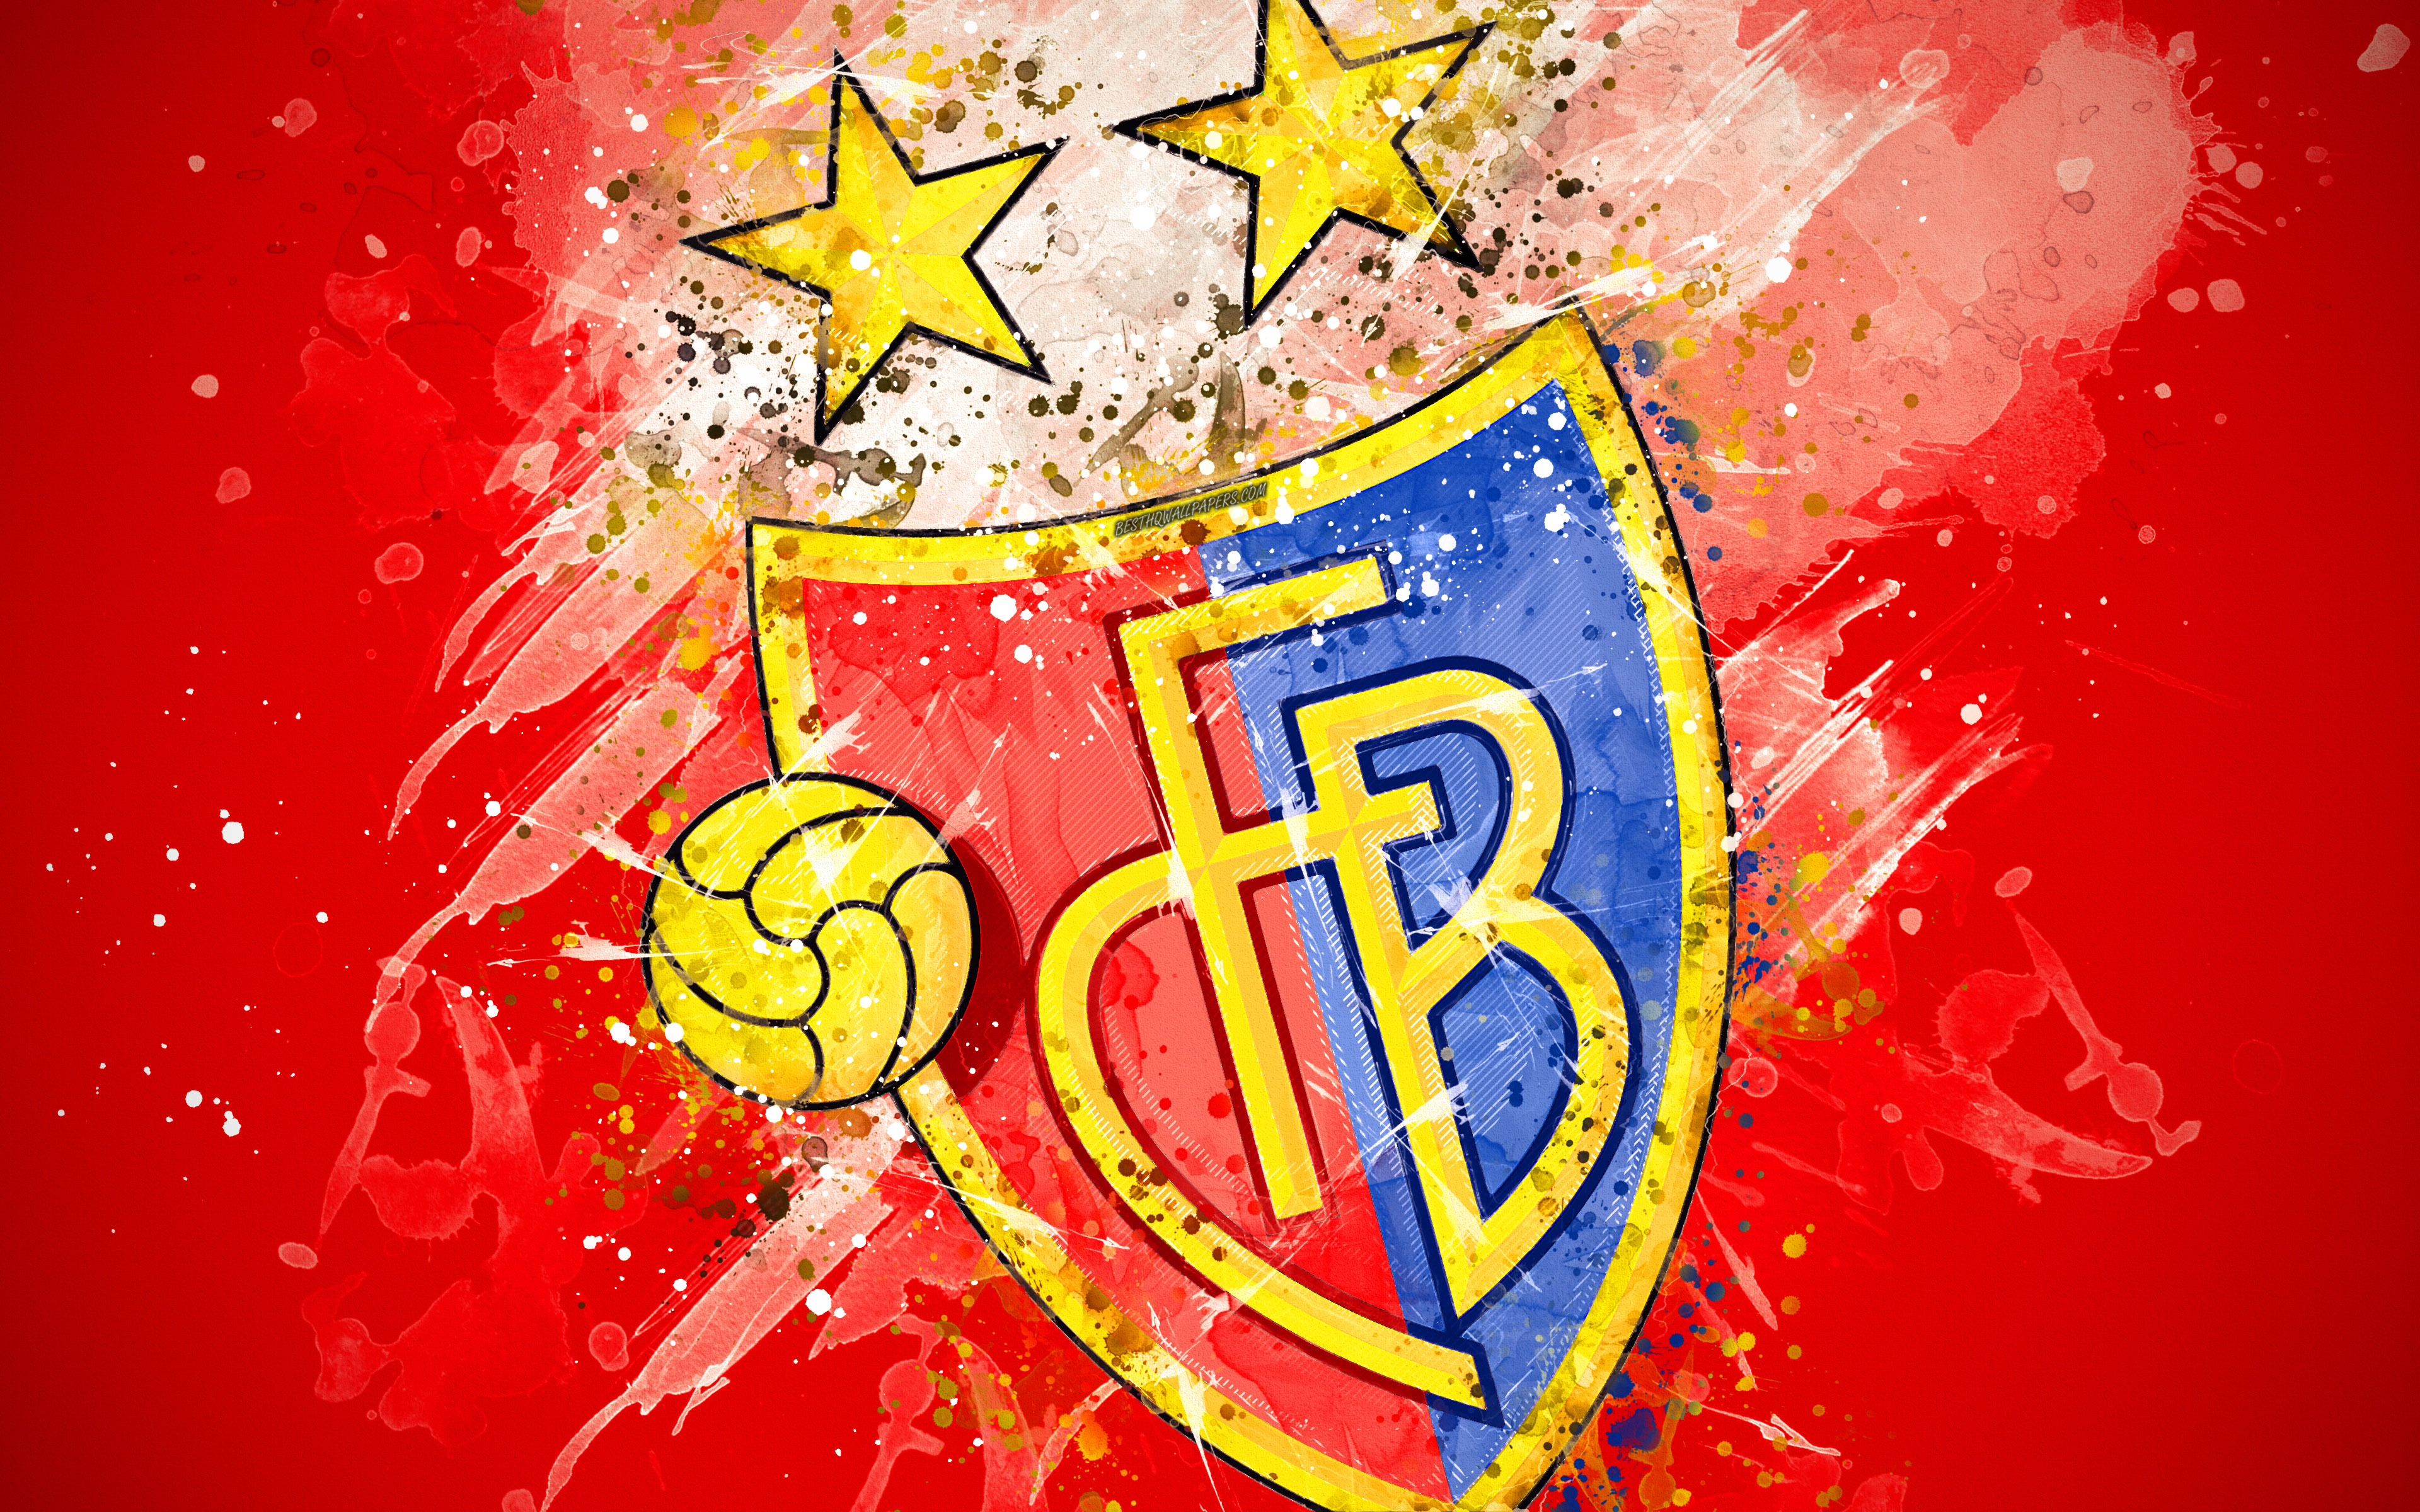 Download wallpaper FC Basel, 4k, paint art, logo, creative, Swiss football team, Swiss Super League, emblem, red background, grunge style, Basel, Switzerland, football for desktop with resolution 3840x2400. High Quality HD picture